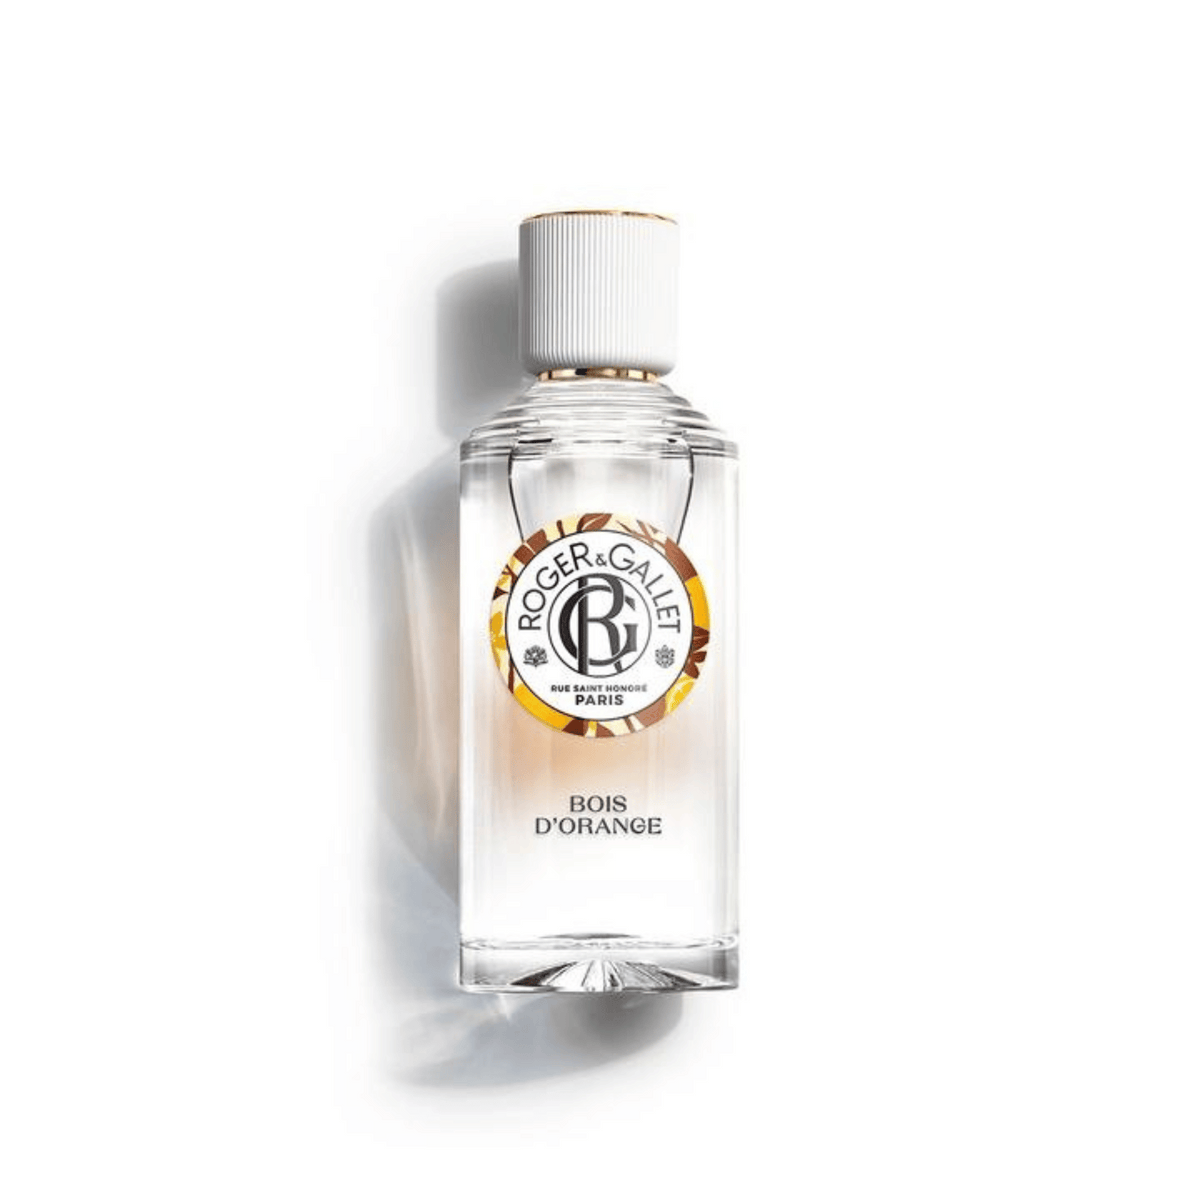 Primary Image of Bois D'Orange Wellbeing Water Fragrance Spray